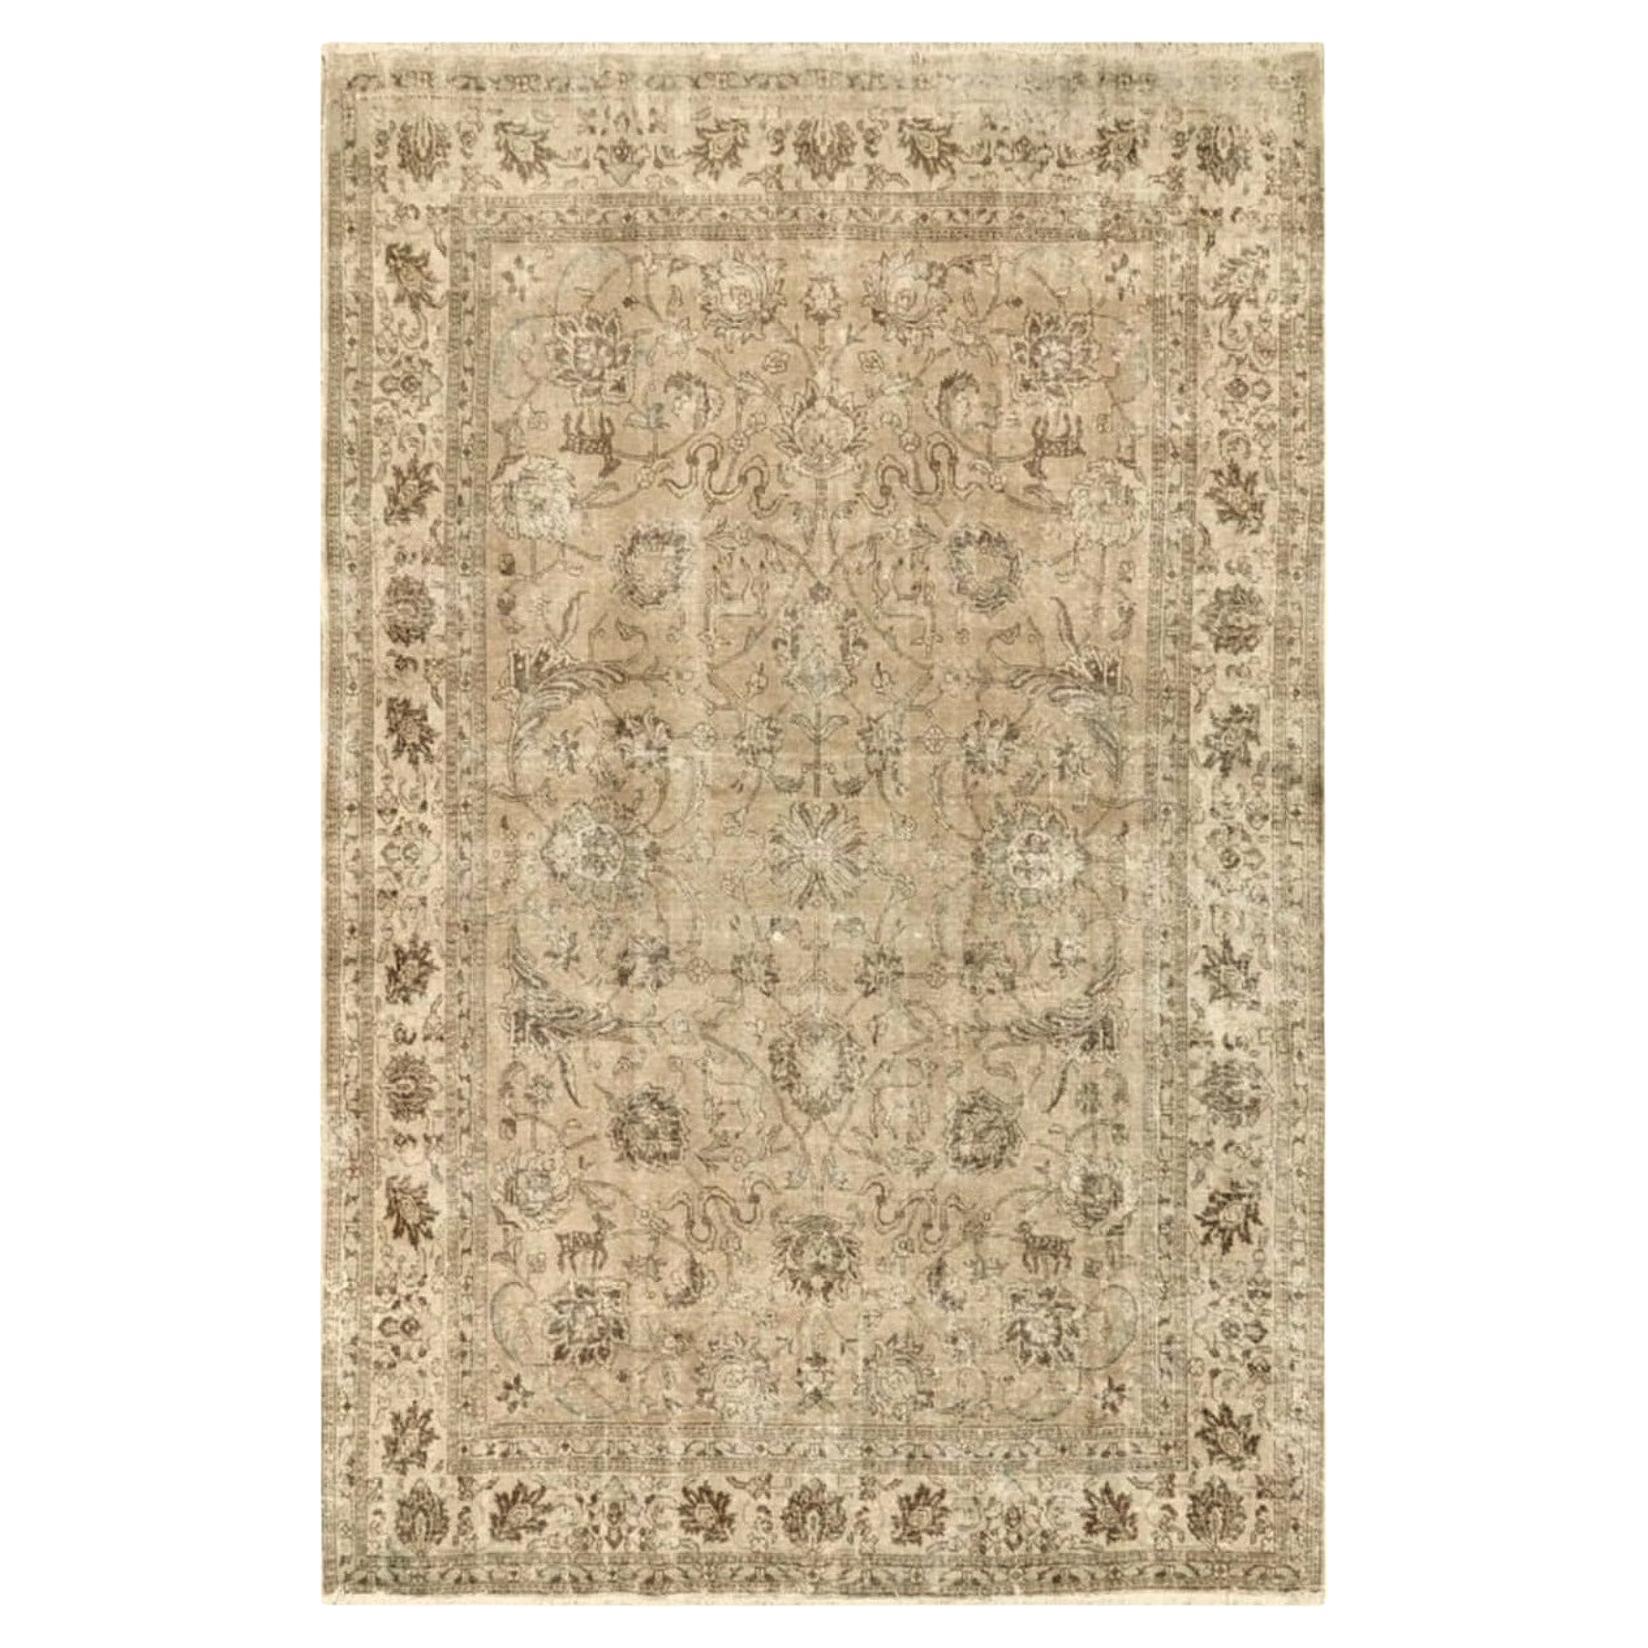 Tabriz Rug Room Size 8x11 ft Classic Vintage Muted Gray Beige Brown Hand Knotted im Angebot